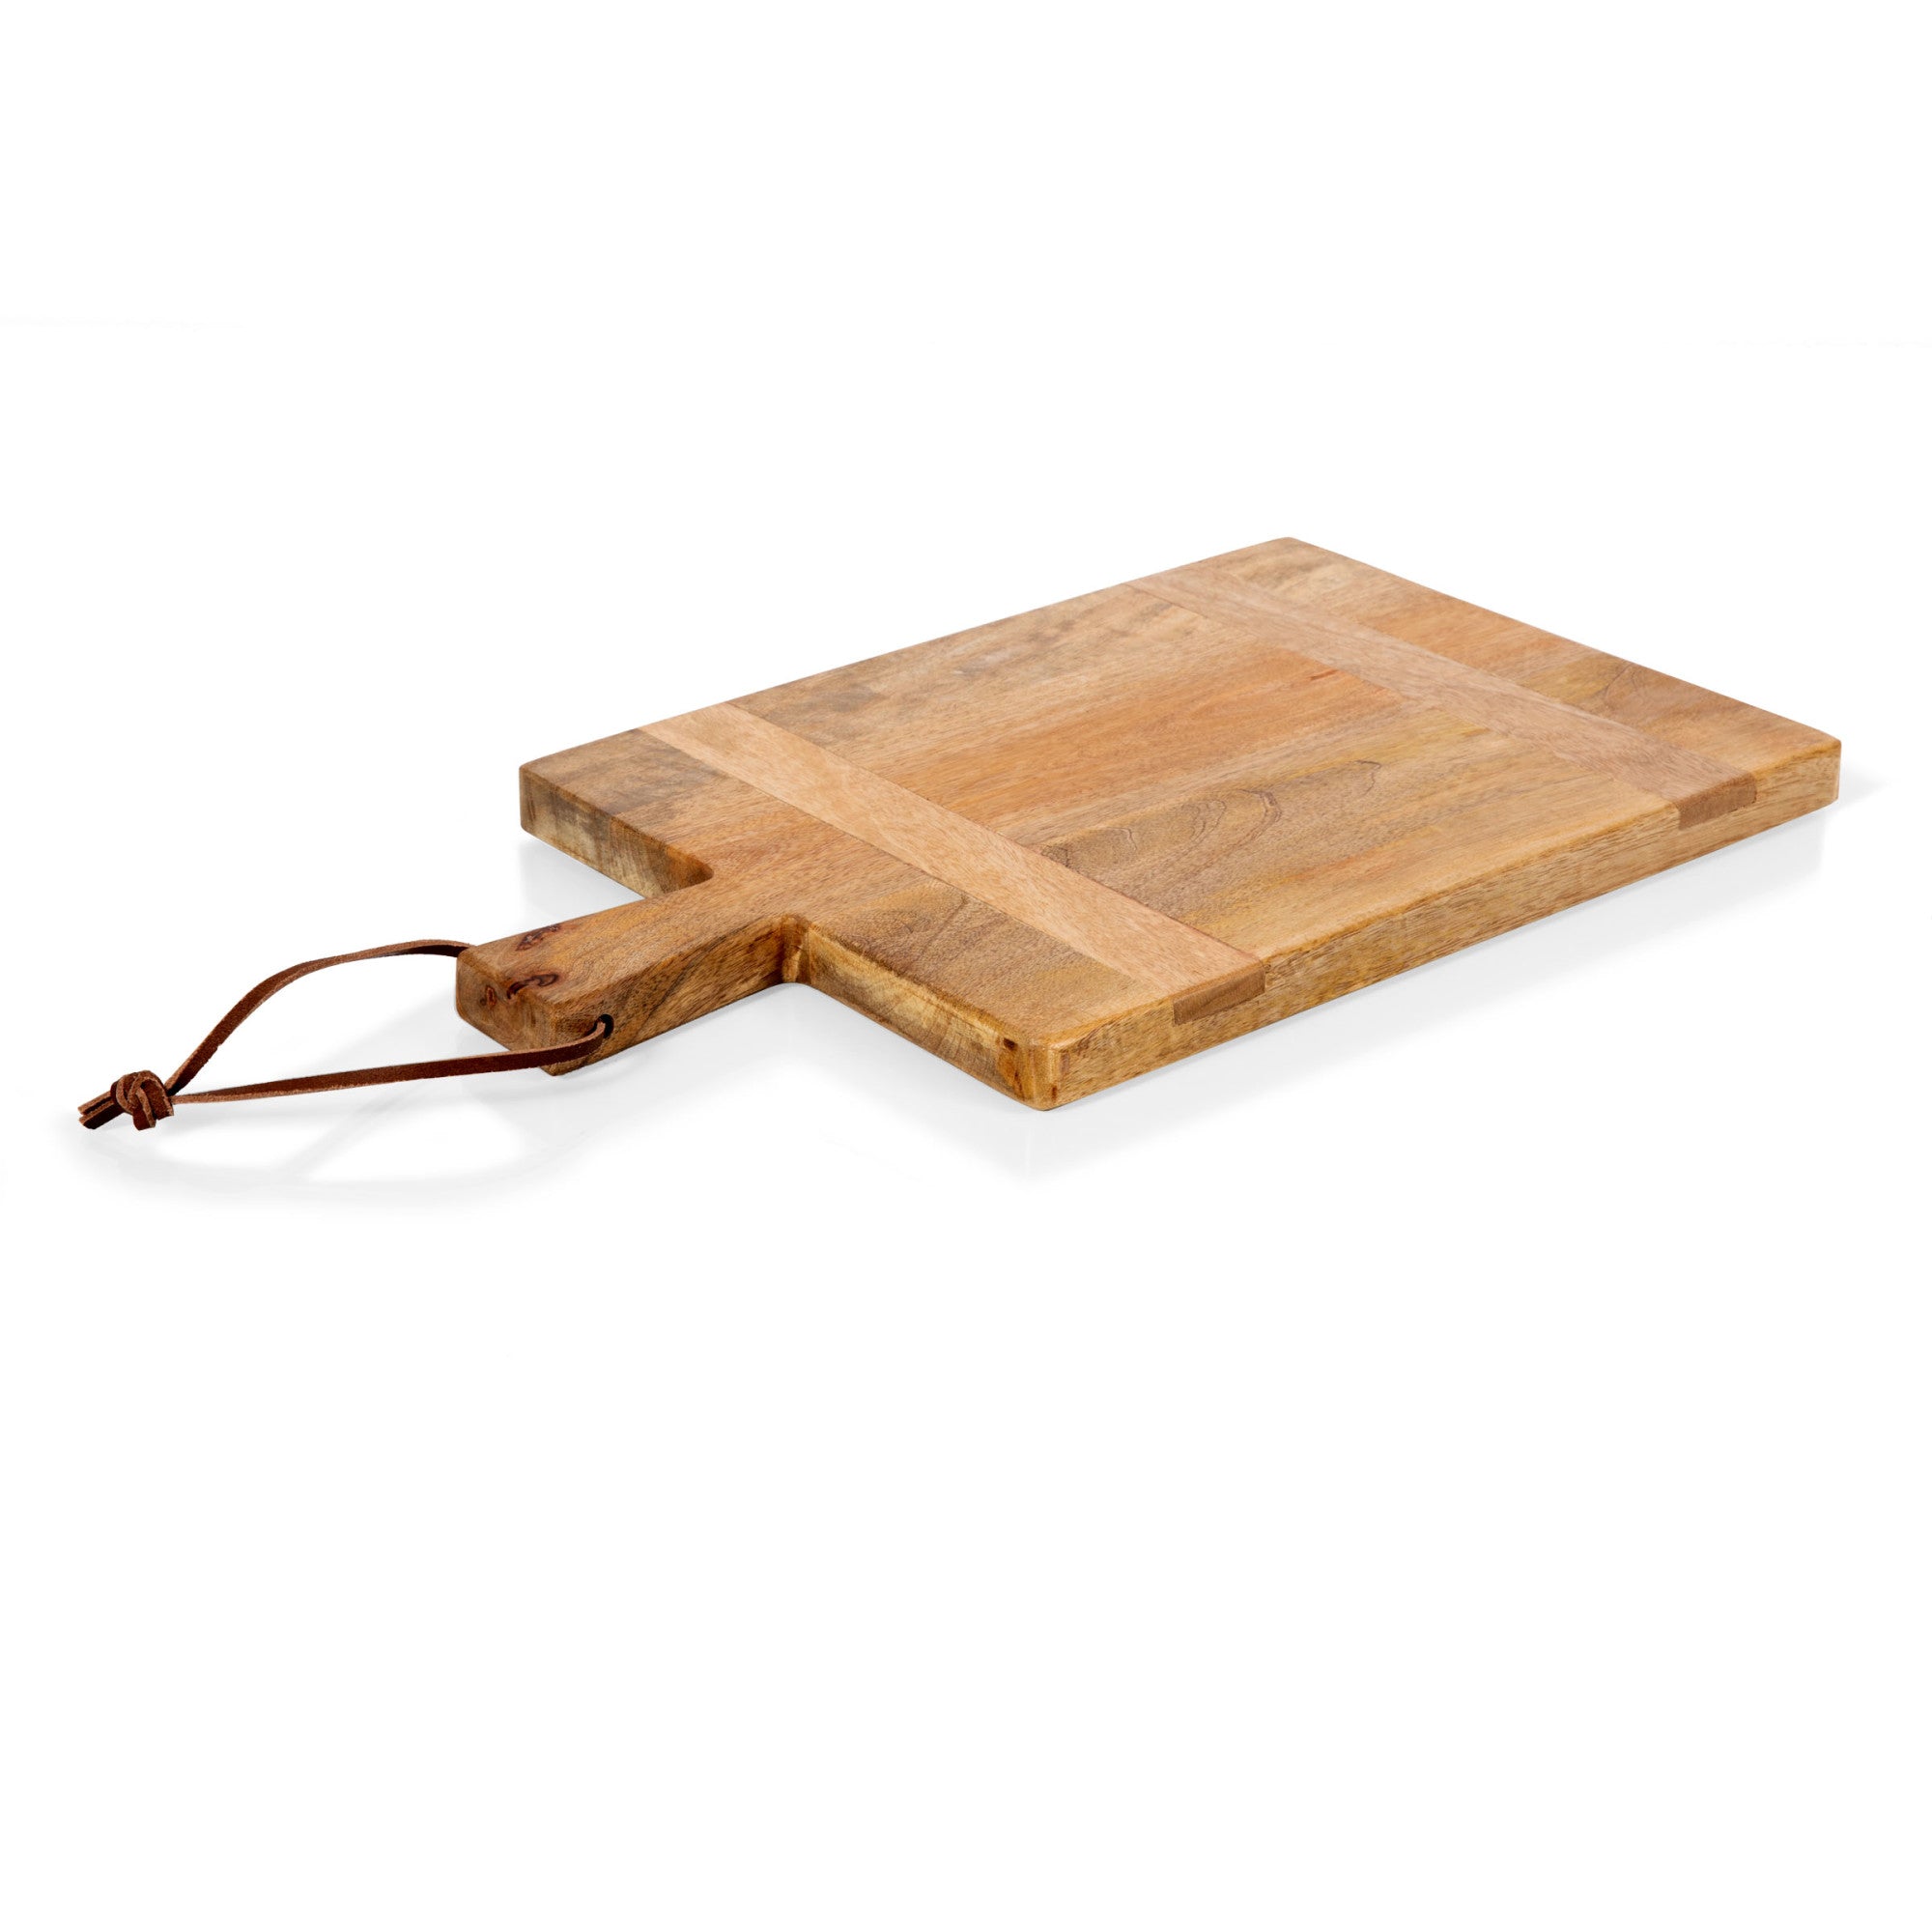 Wood Cutting Board - Sturdy Chopping Board With Pull Out Trays 100